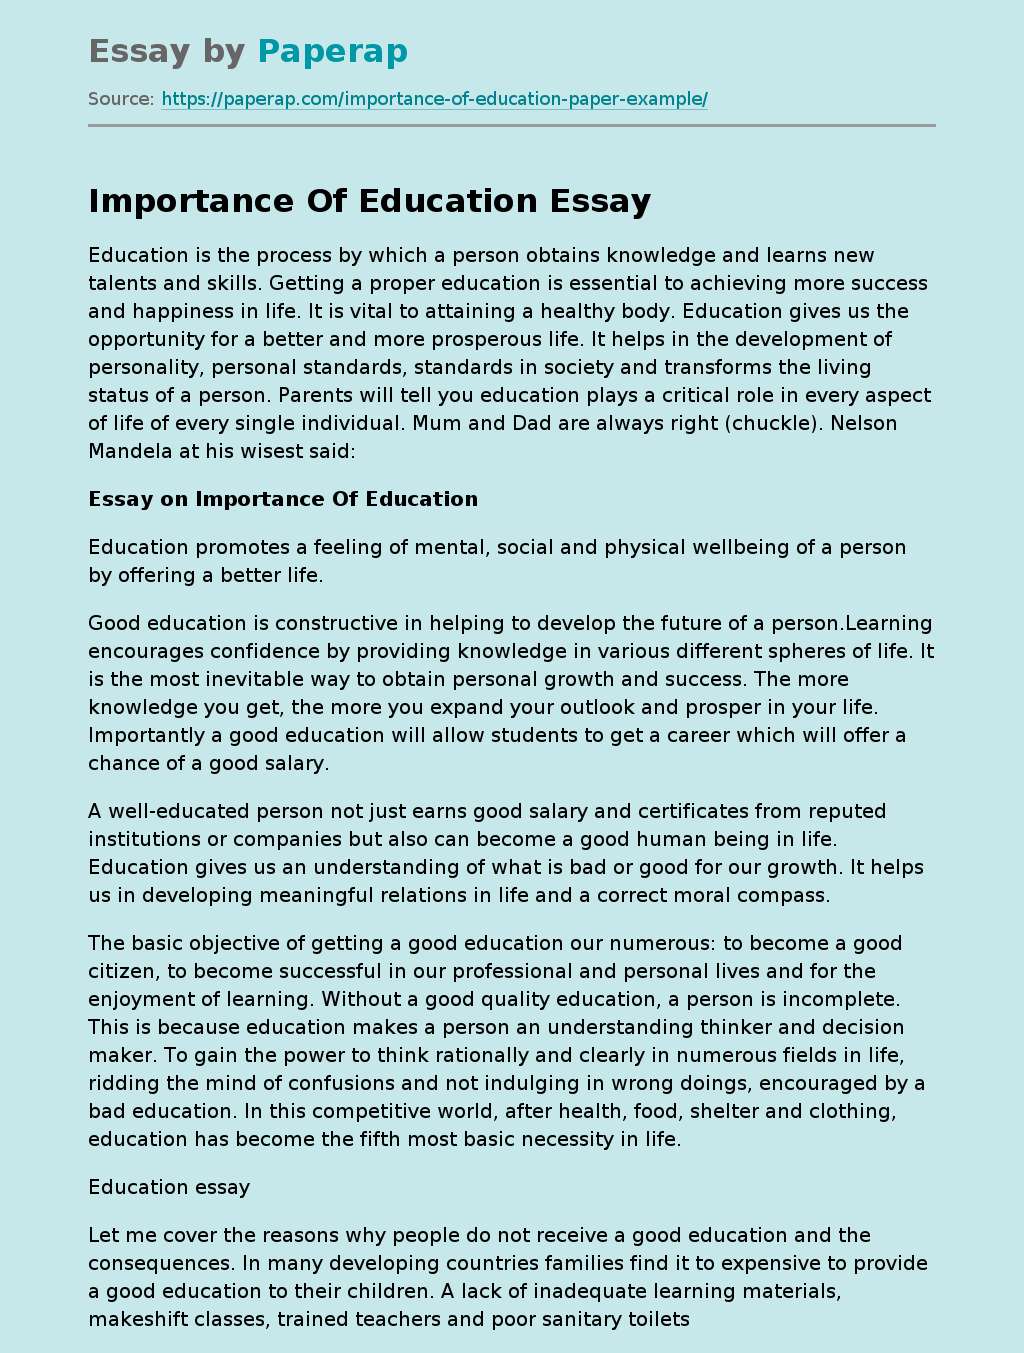 importance of education essay 2000 words